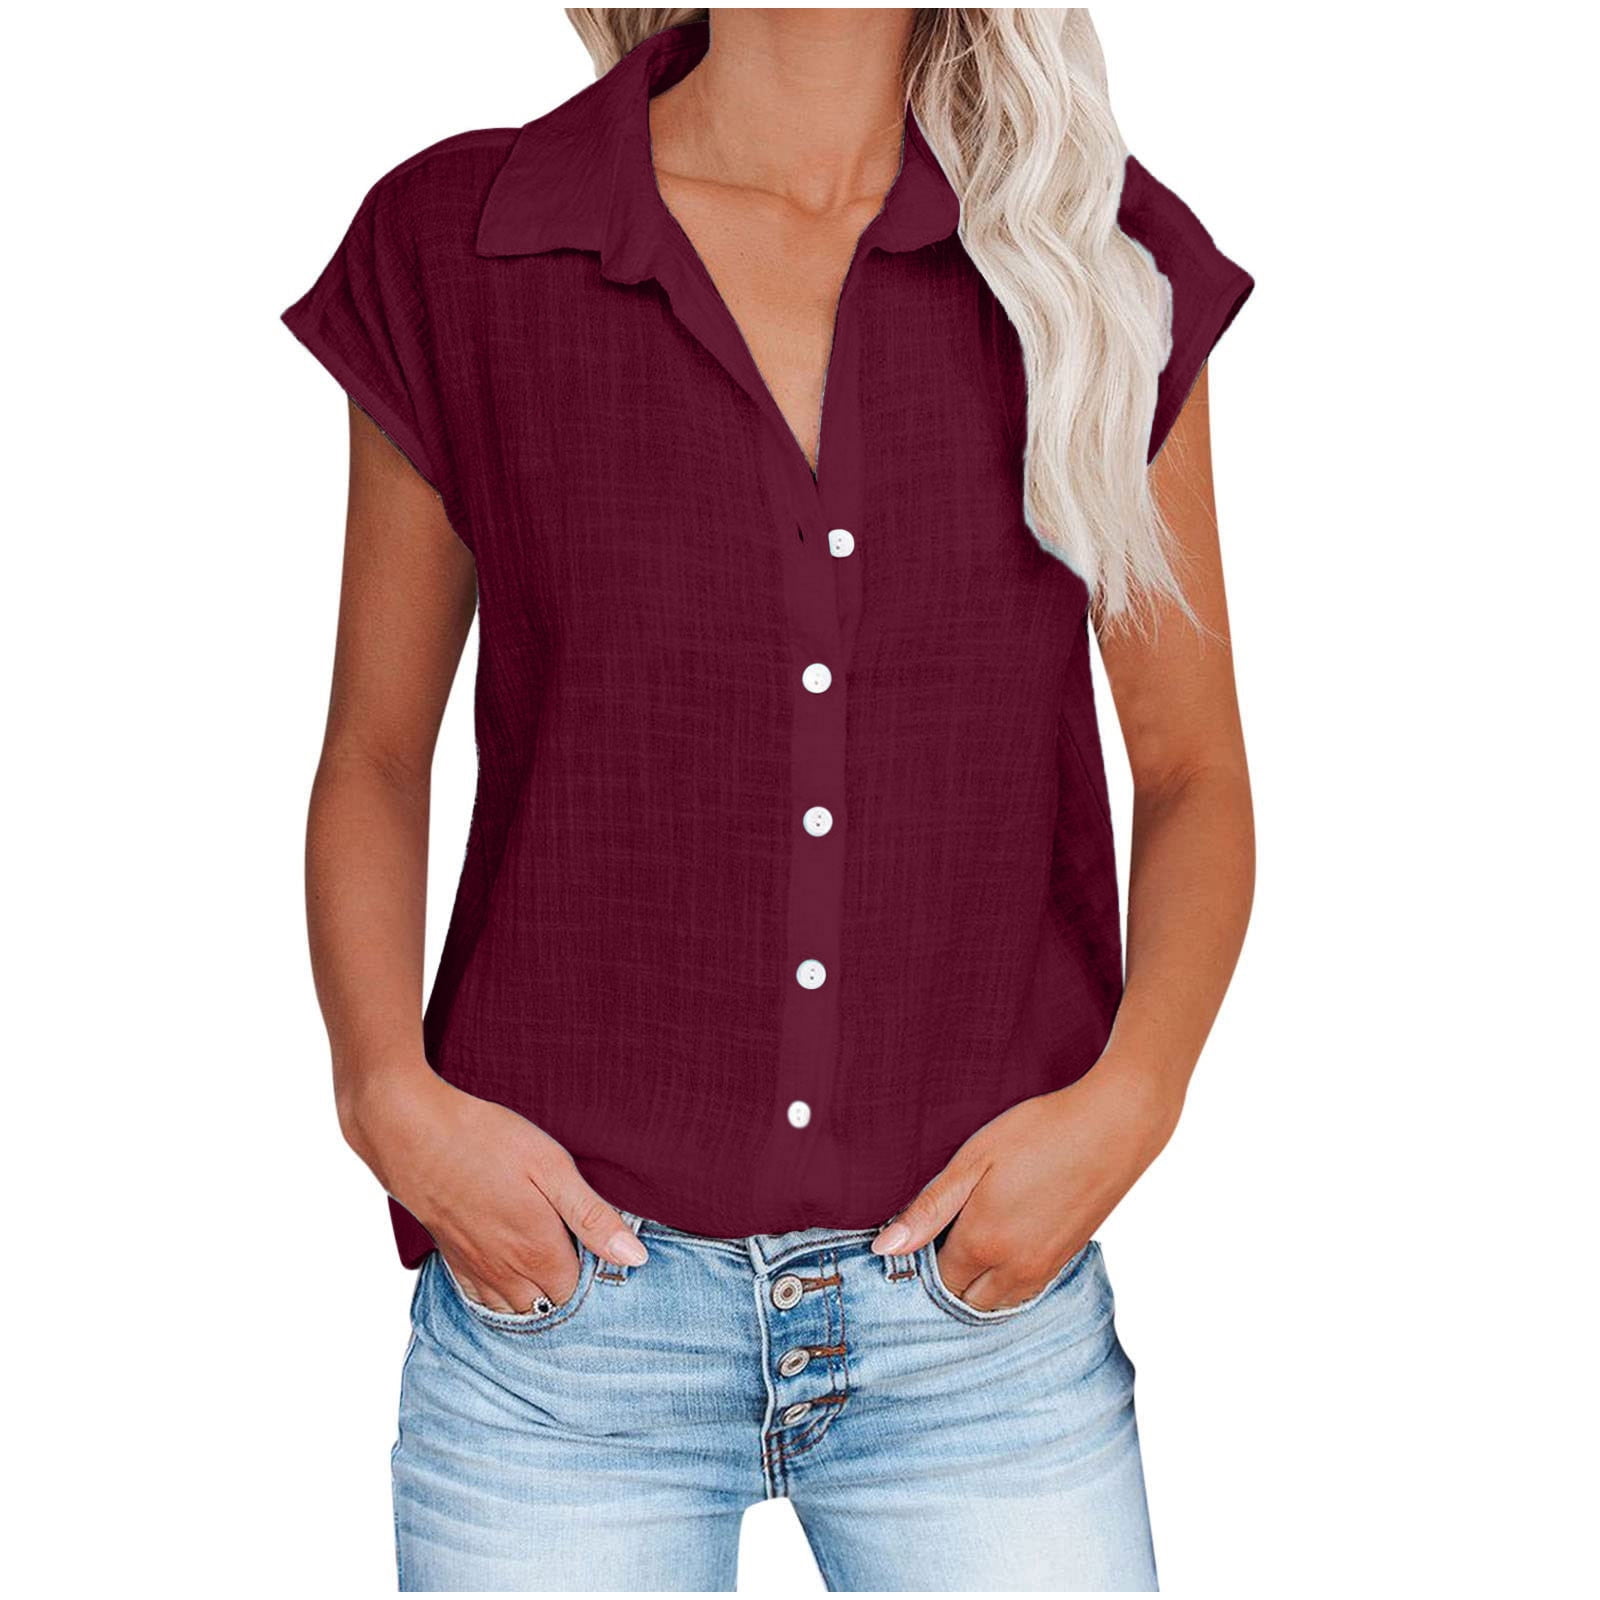  Cooling Shirts For Women